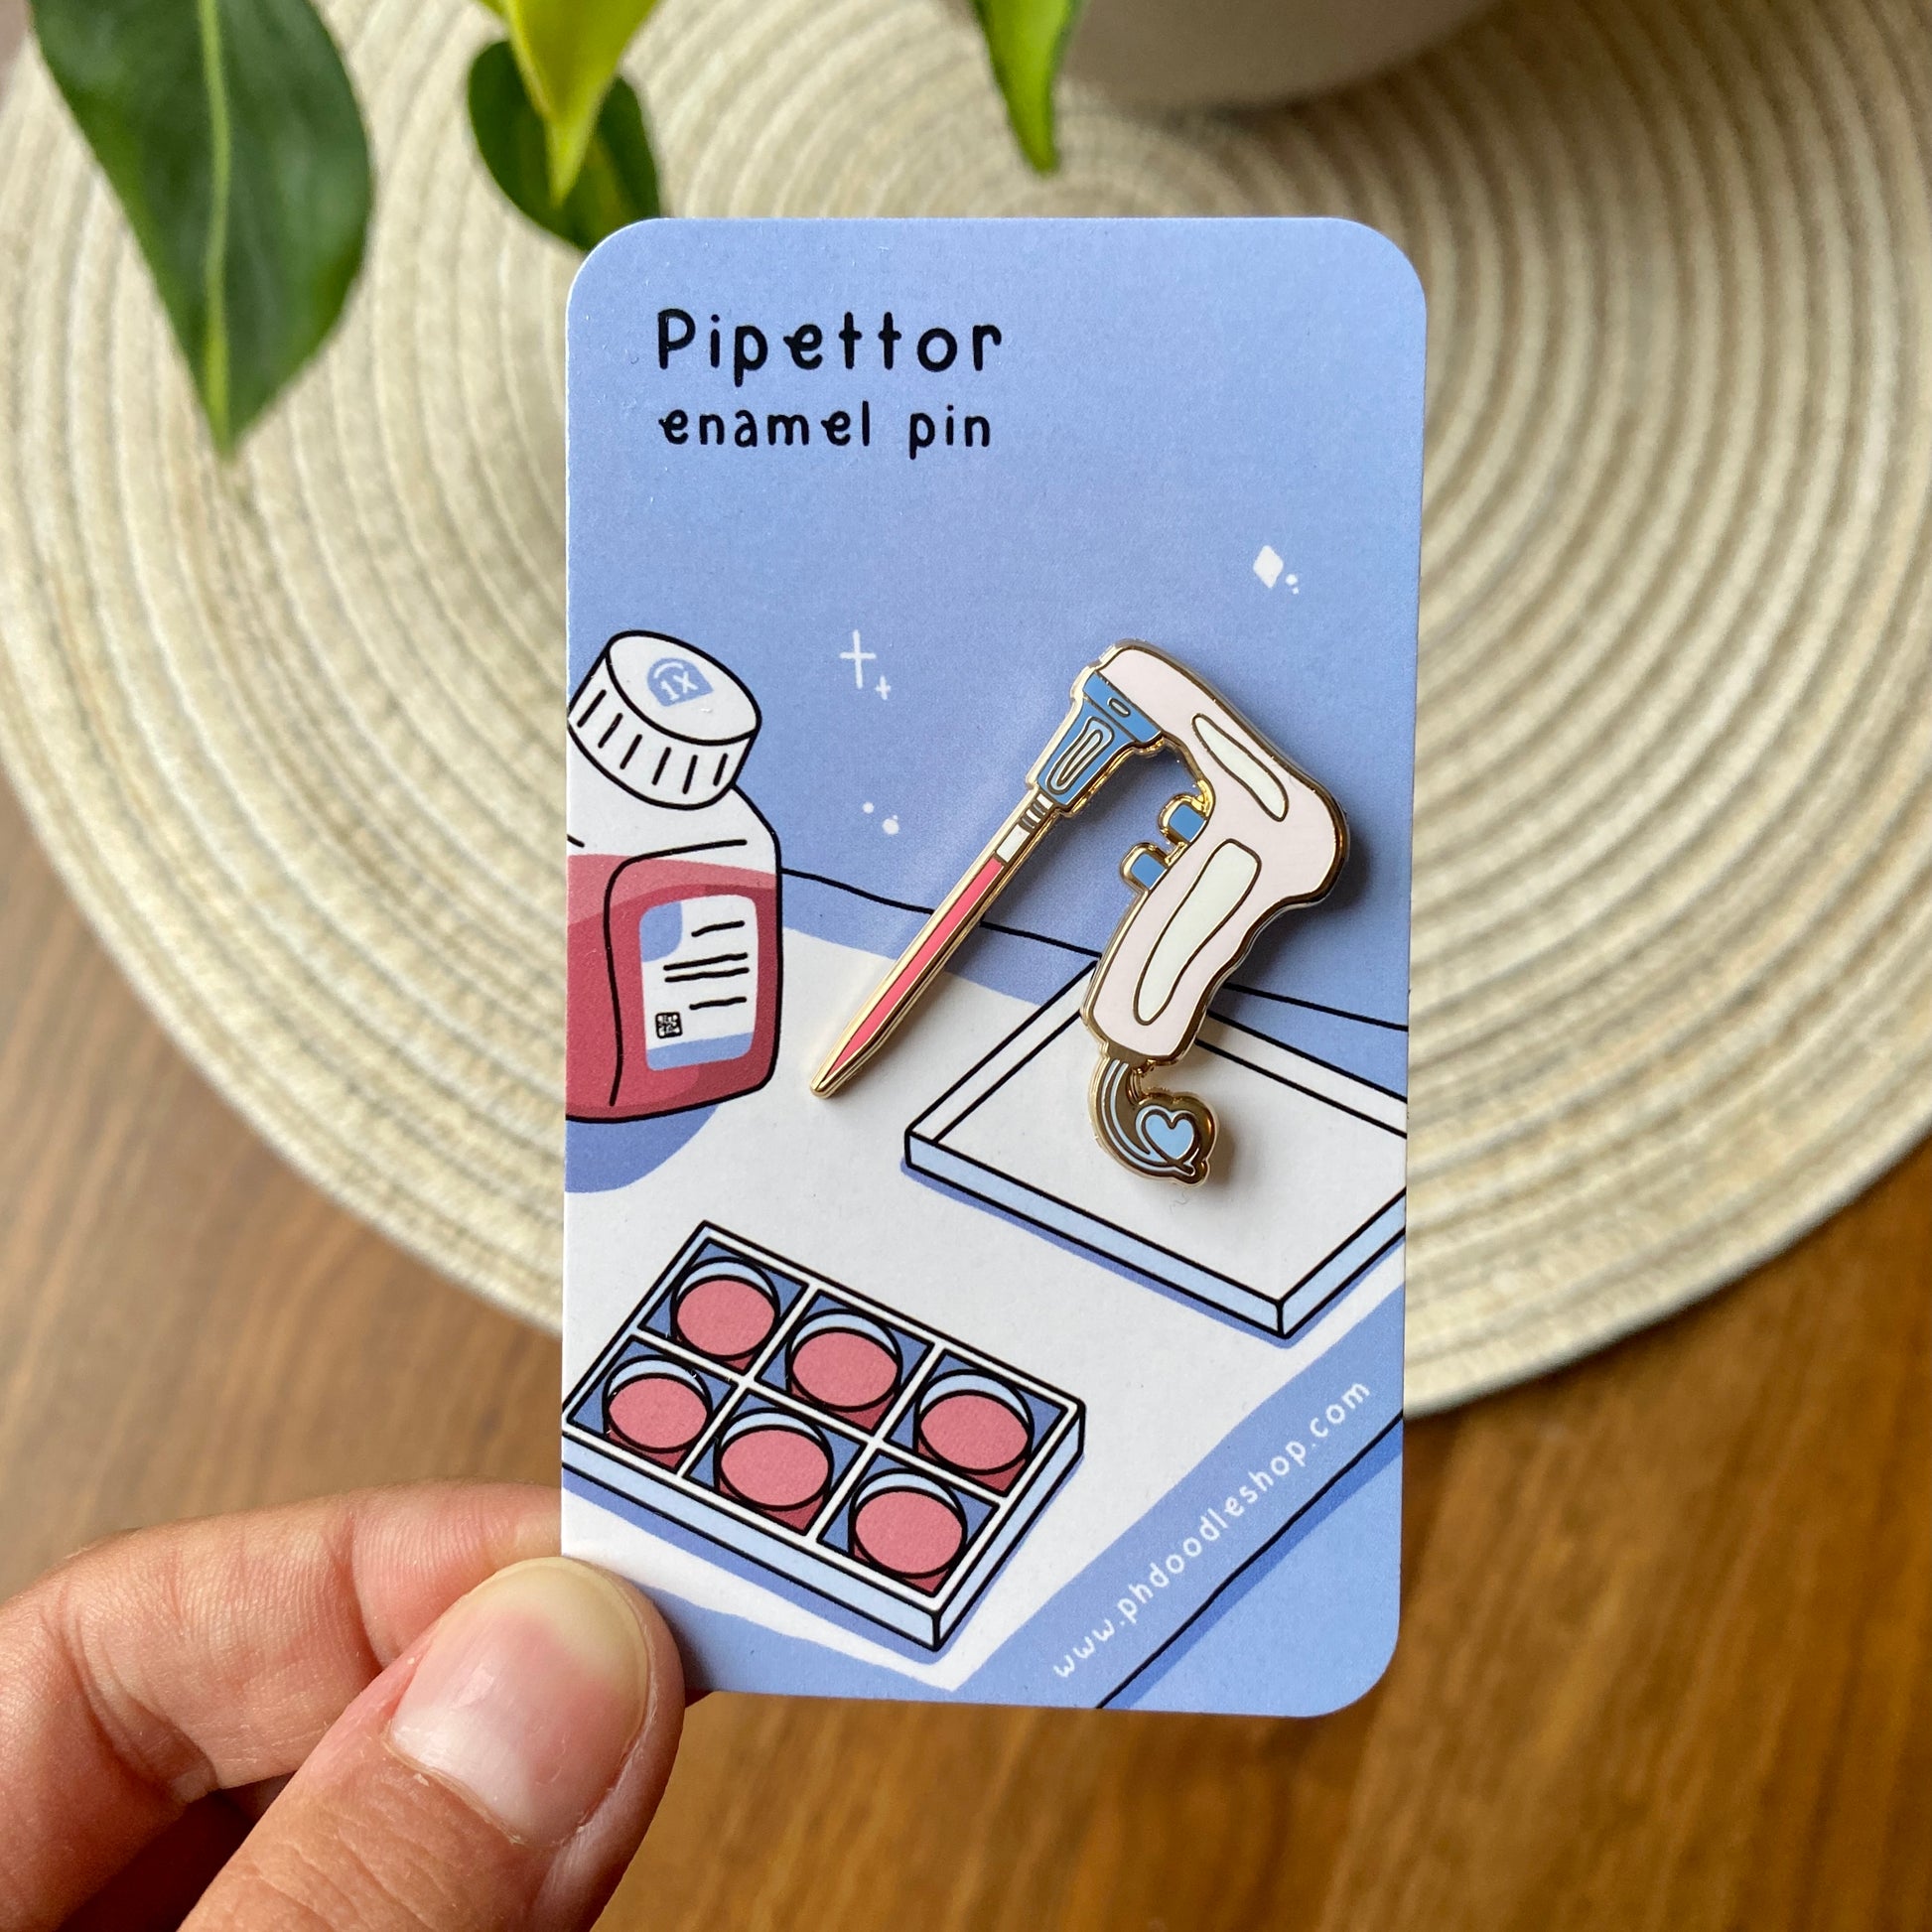 Cell culture enamel pin set (pink)